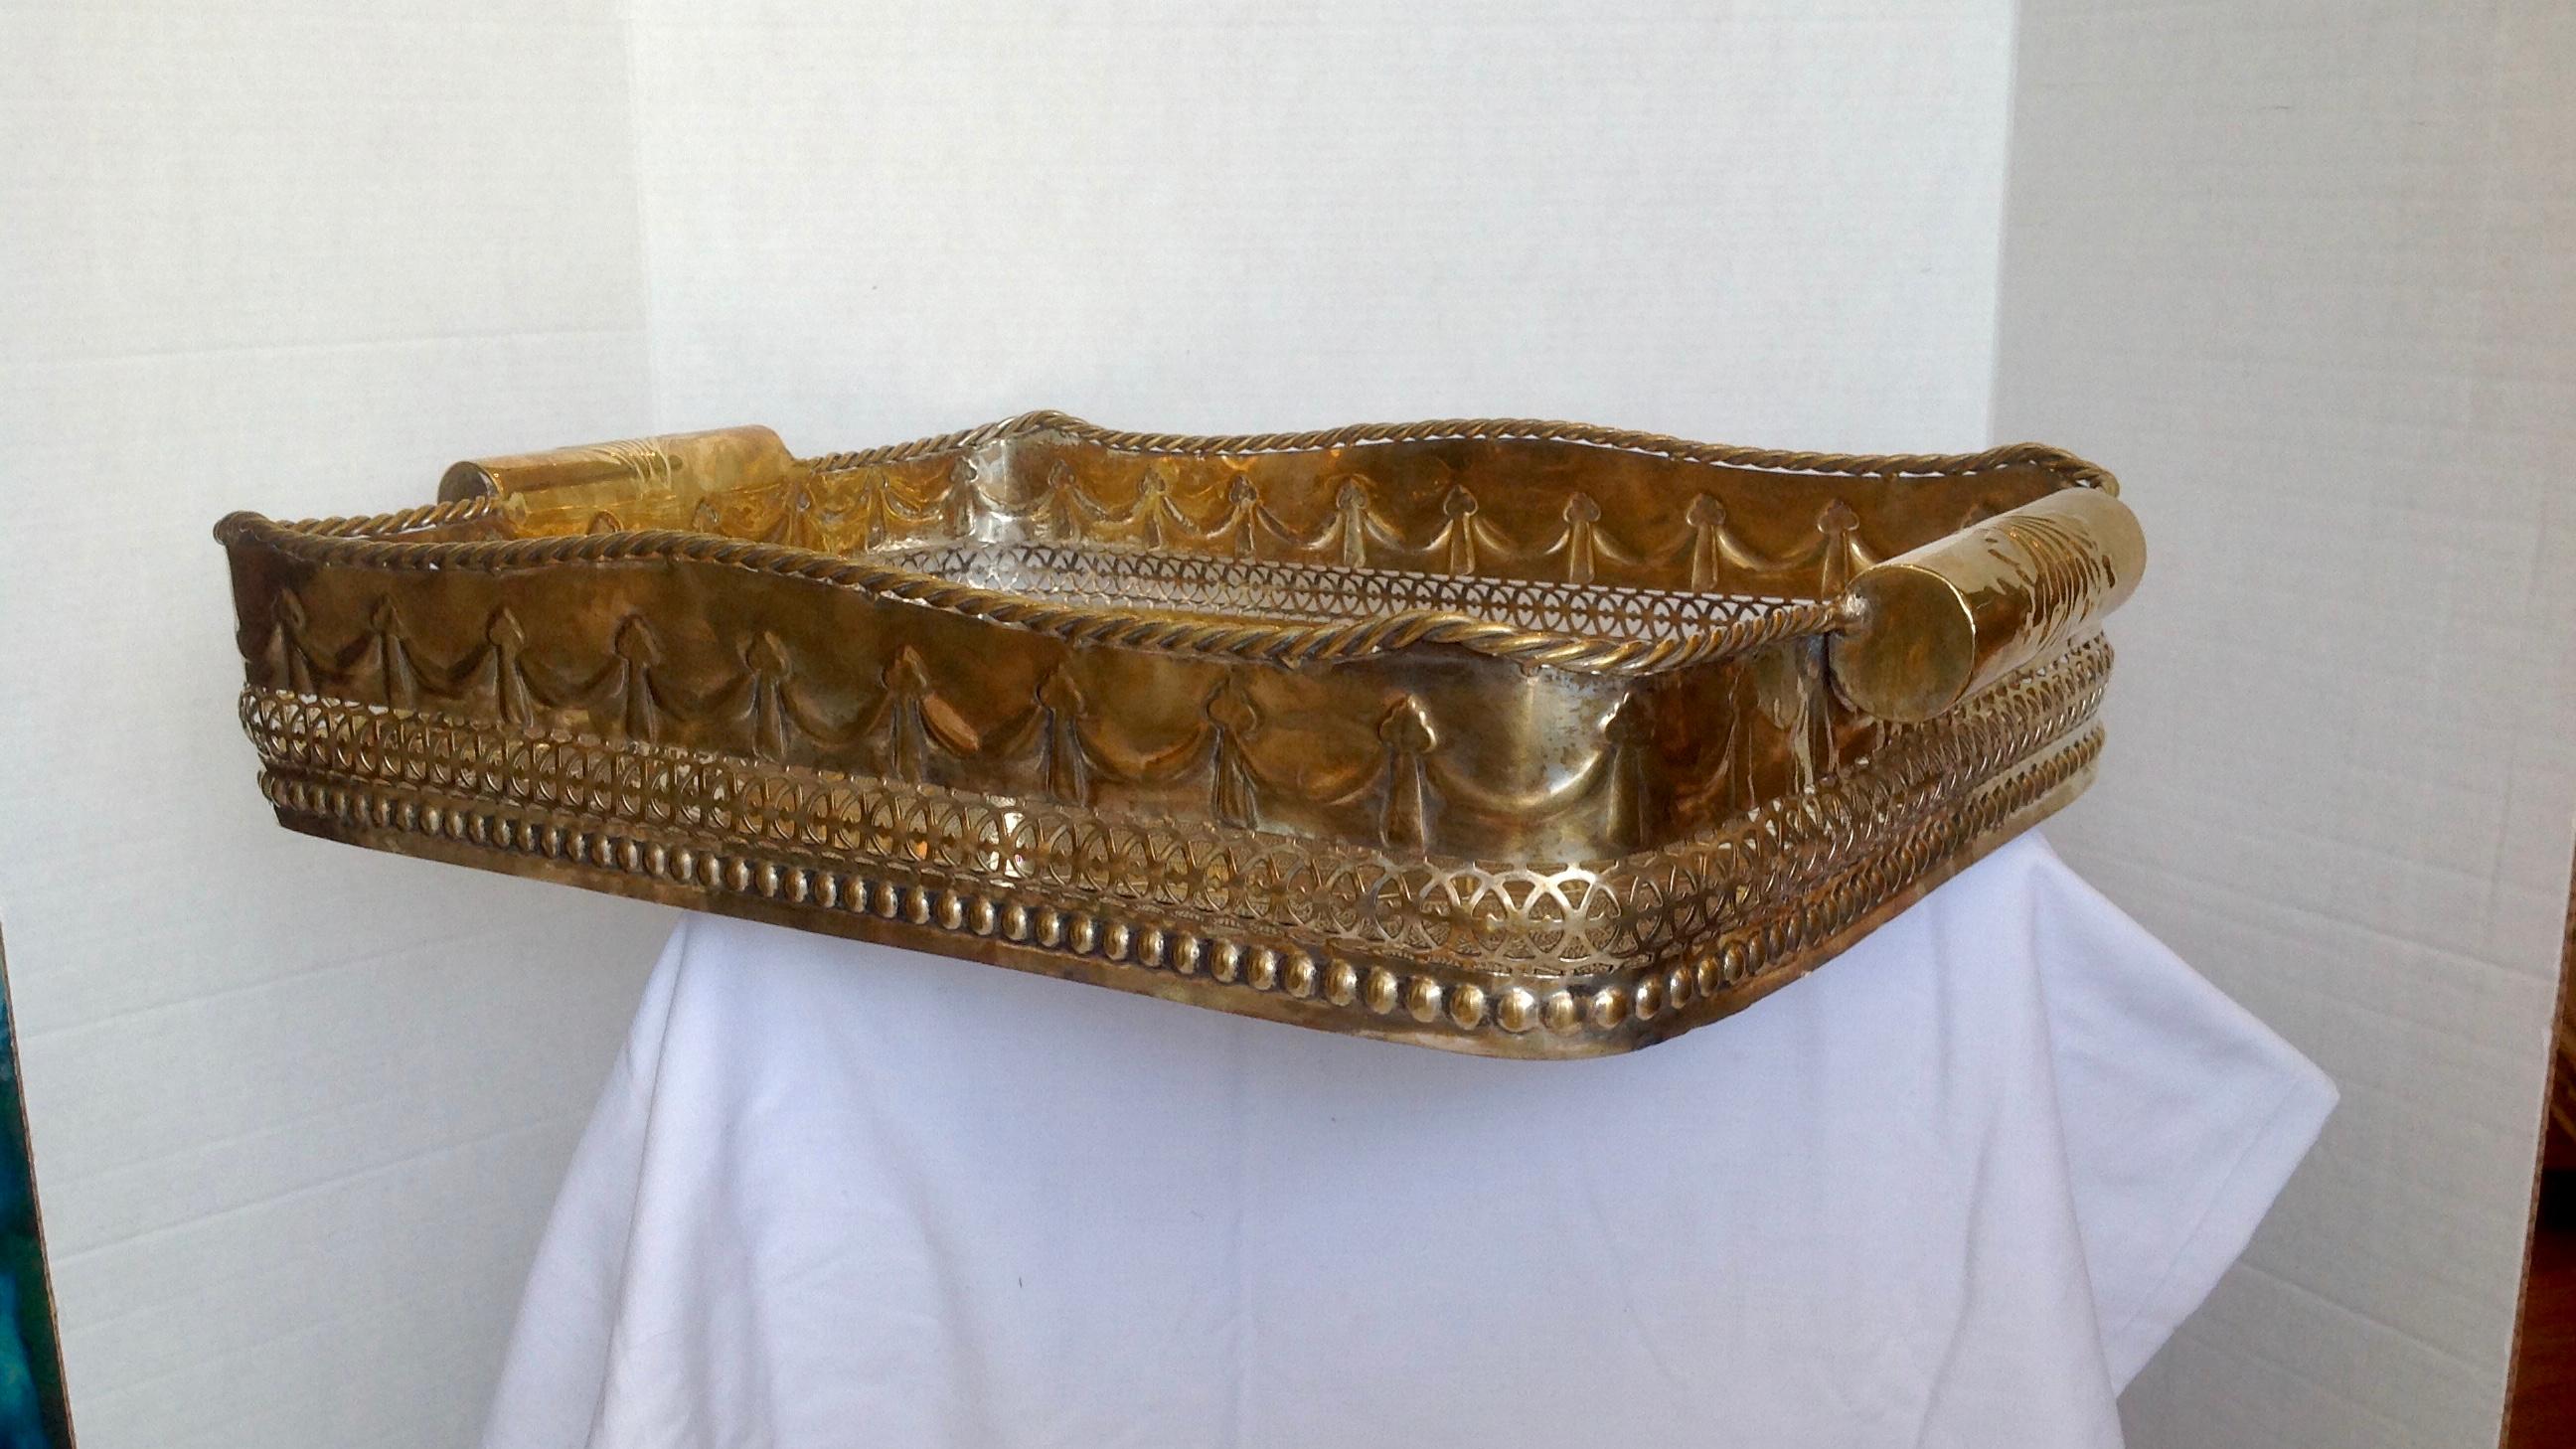 Large and impressive: fashioned with a gold wash and artistically decorated with
extensive and elaborate embossing.